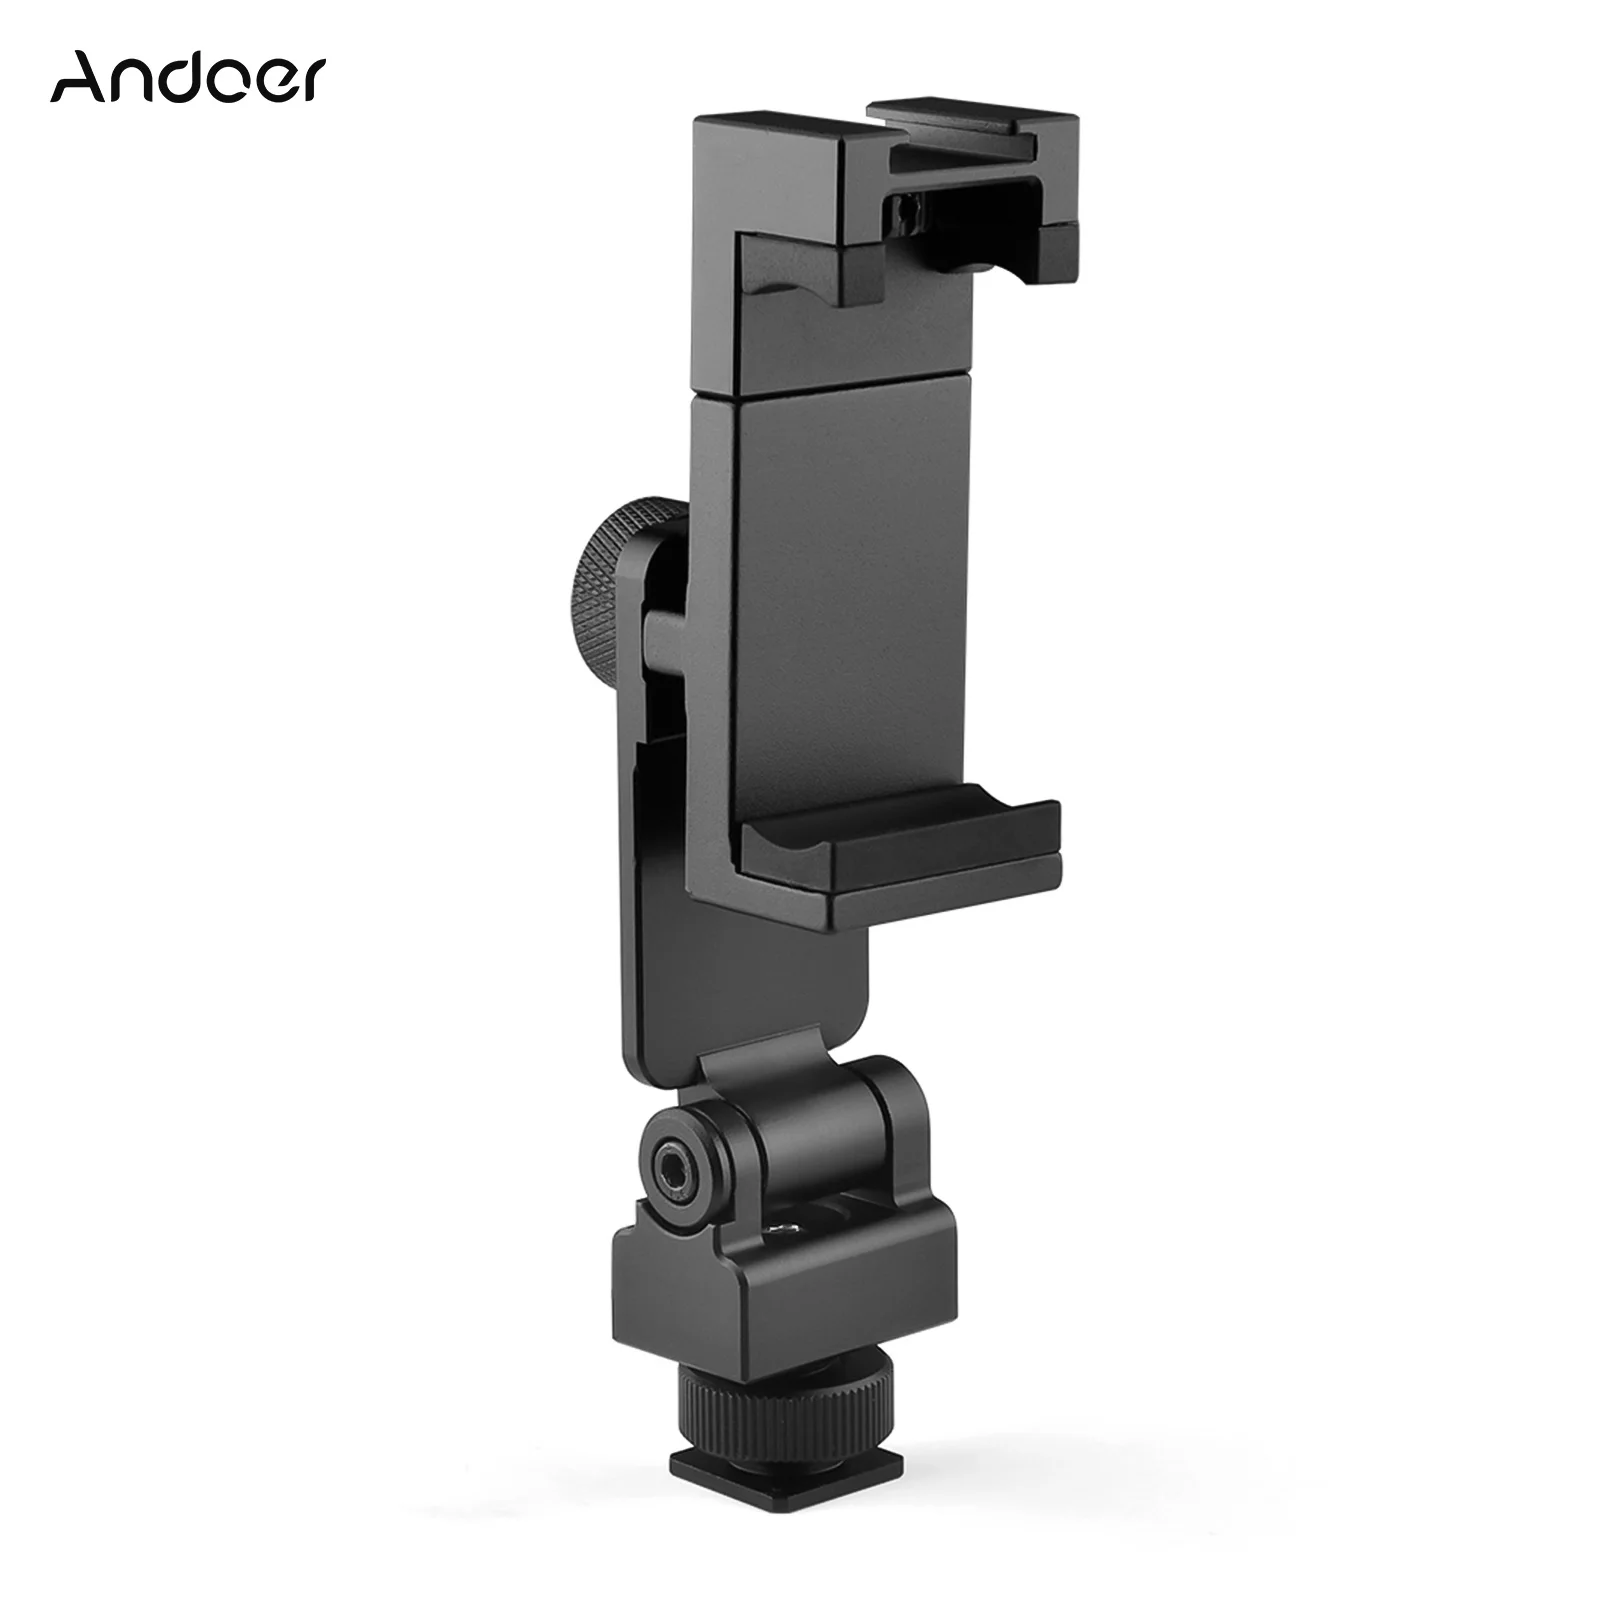 

Andoer Cold Shoe Phone Clamp Holder Stand 360° Horizontal Rotation 180° Flip for Smartphone Video Microphone LED Light Mounting